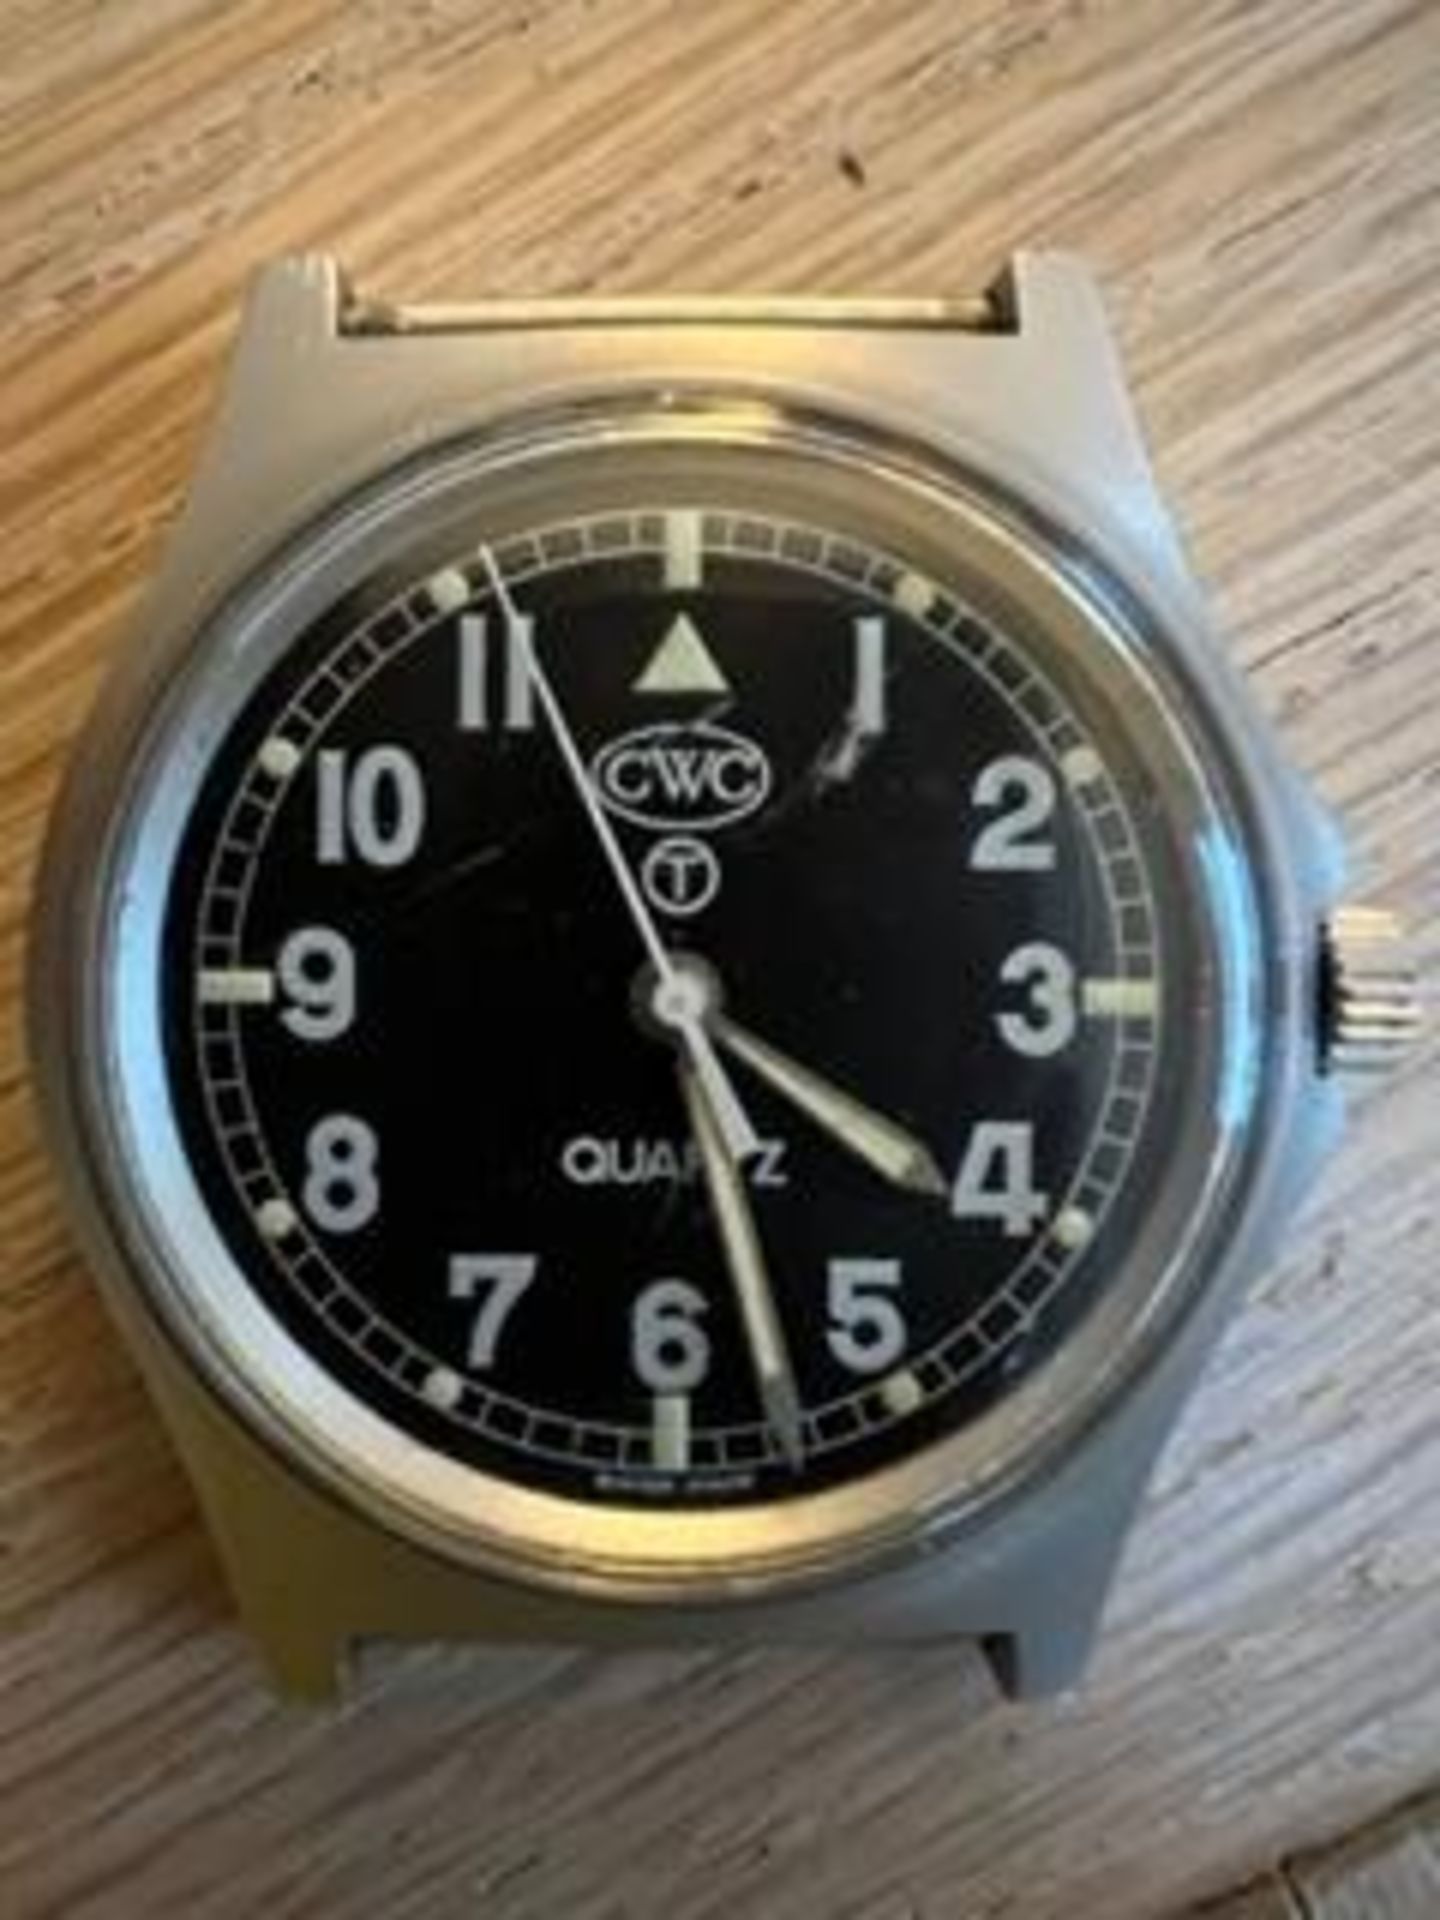 RARE CWC 0552 ROYAL MARINES ISSUE SERVICE WATCH NATO MARKS DATE 1990*** GULF WAR*** - Image 3 of 7